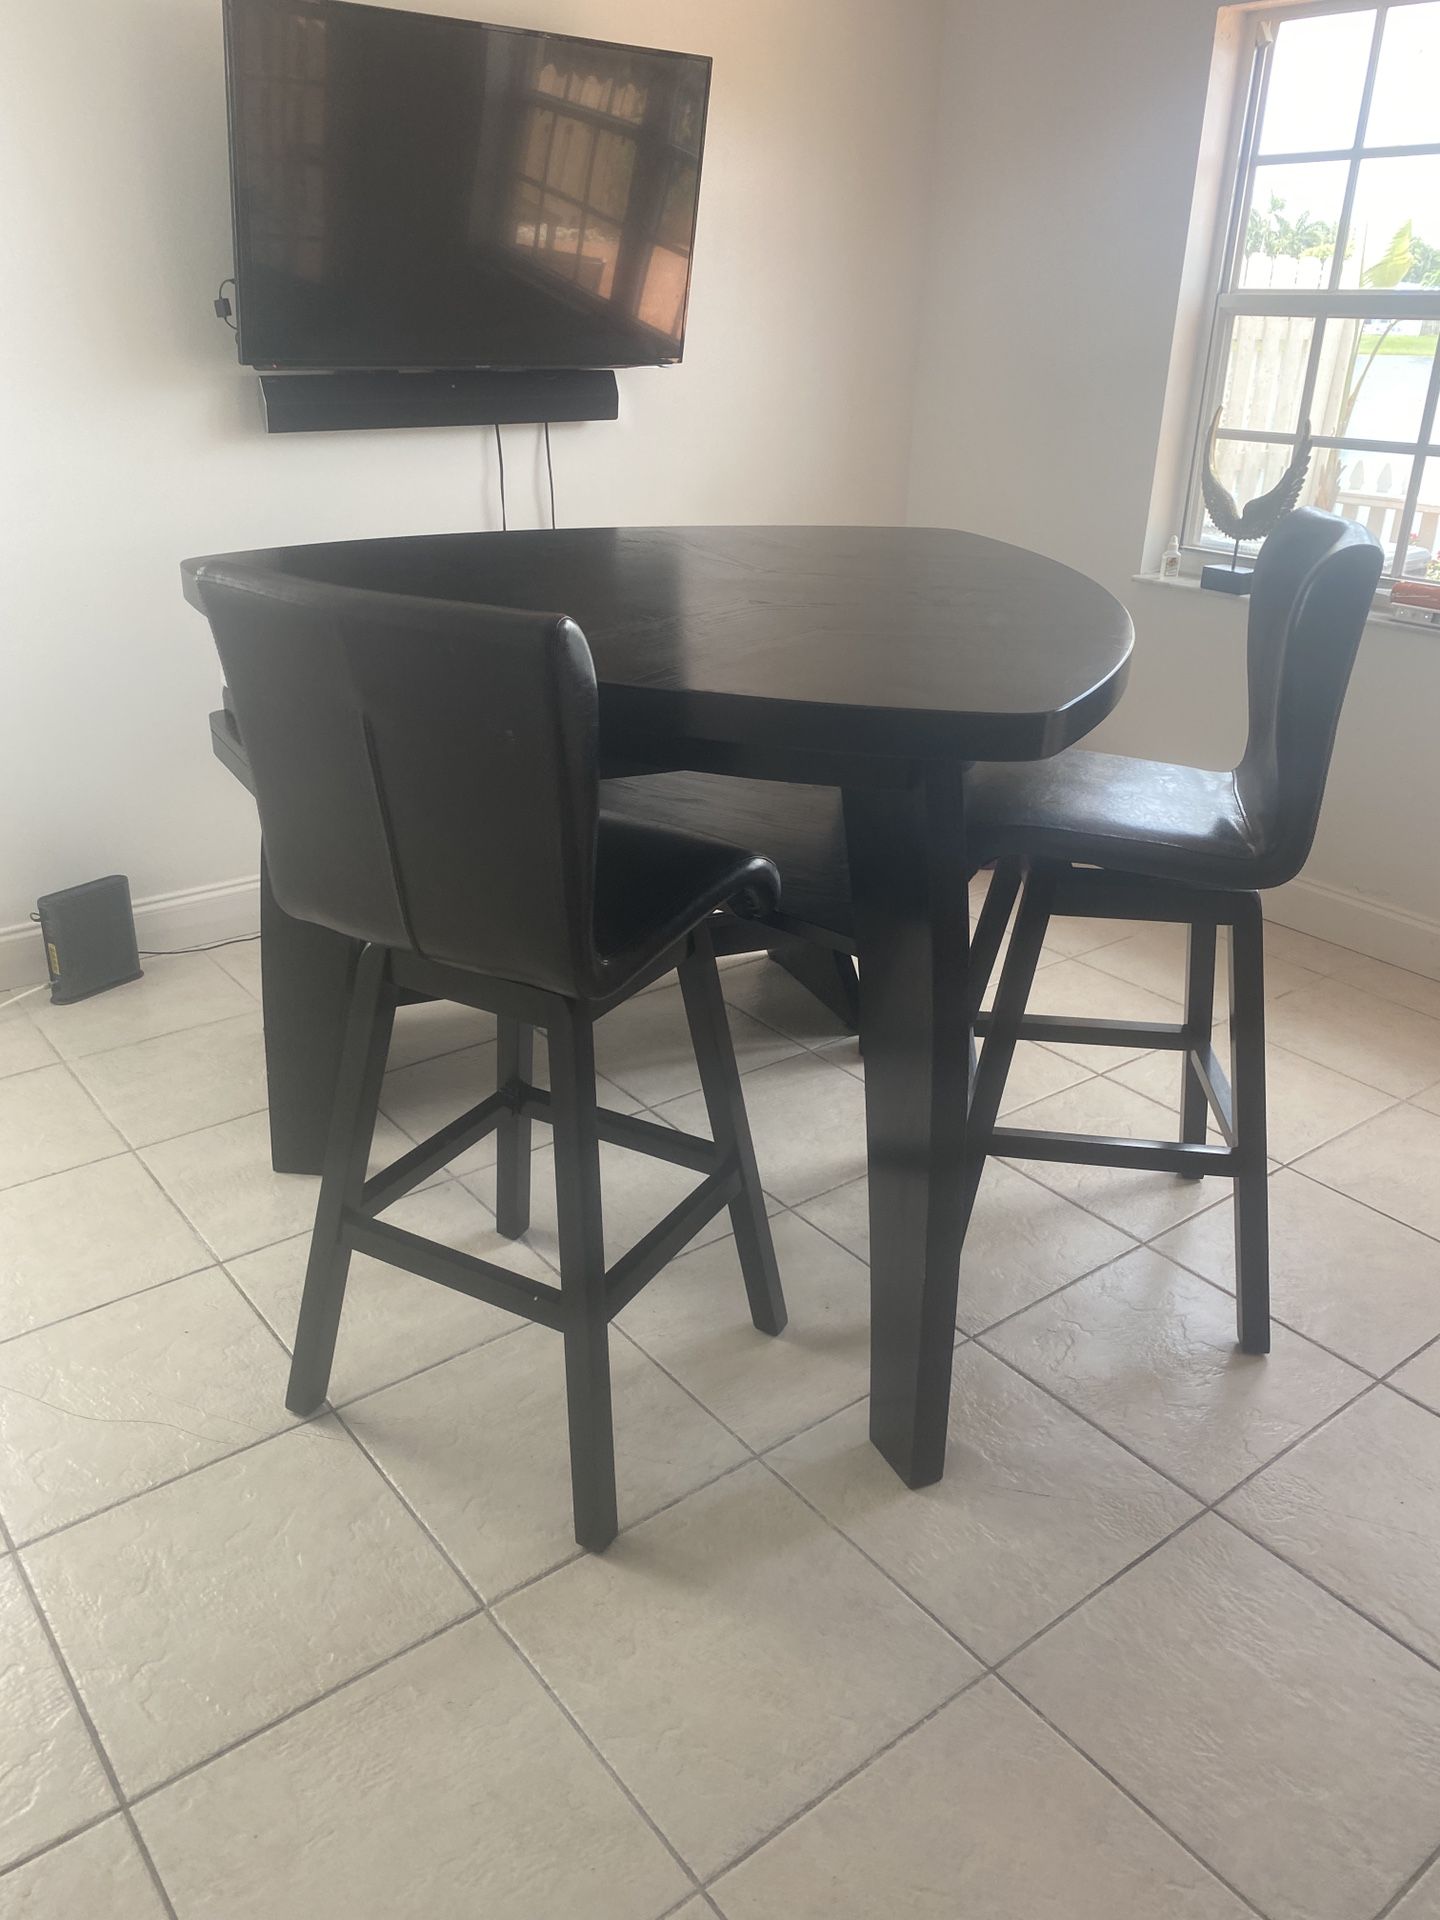 Kitchen table great condition